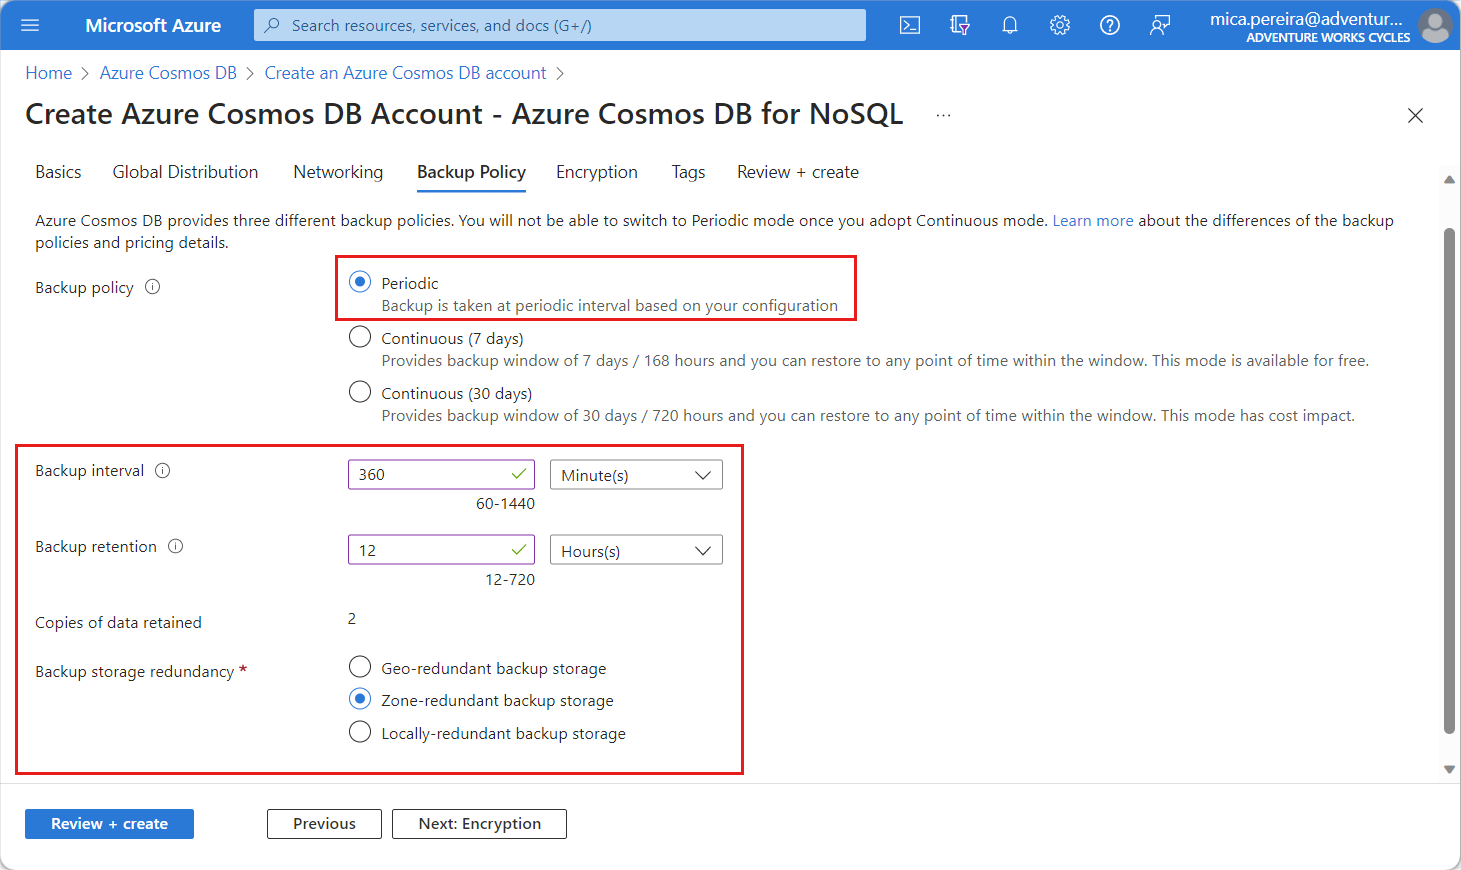 Screenshot of configuring a periodic backup policy for a new Azure Cosmos DB account.